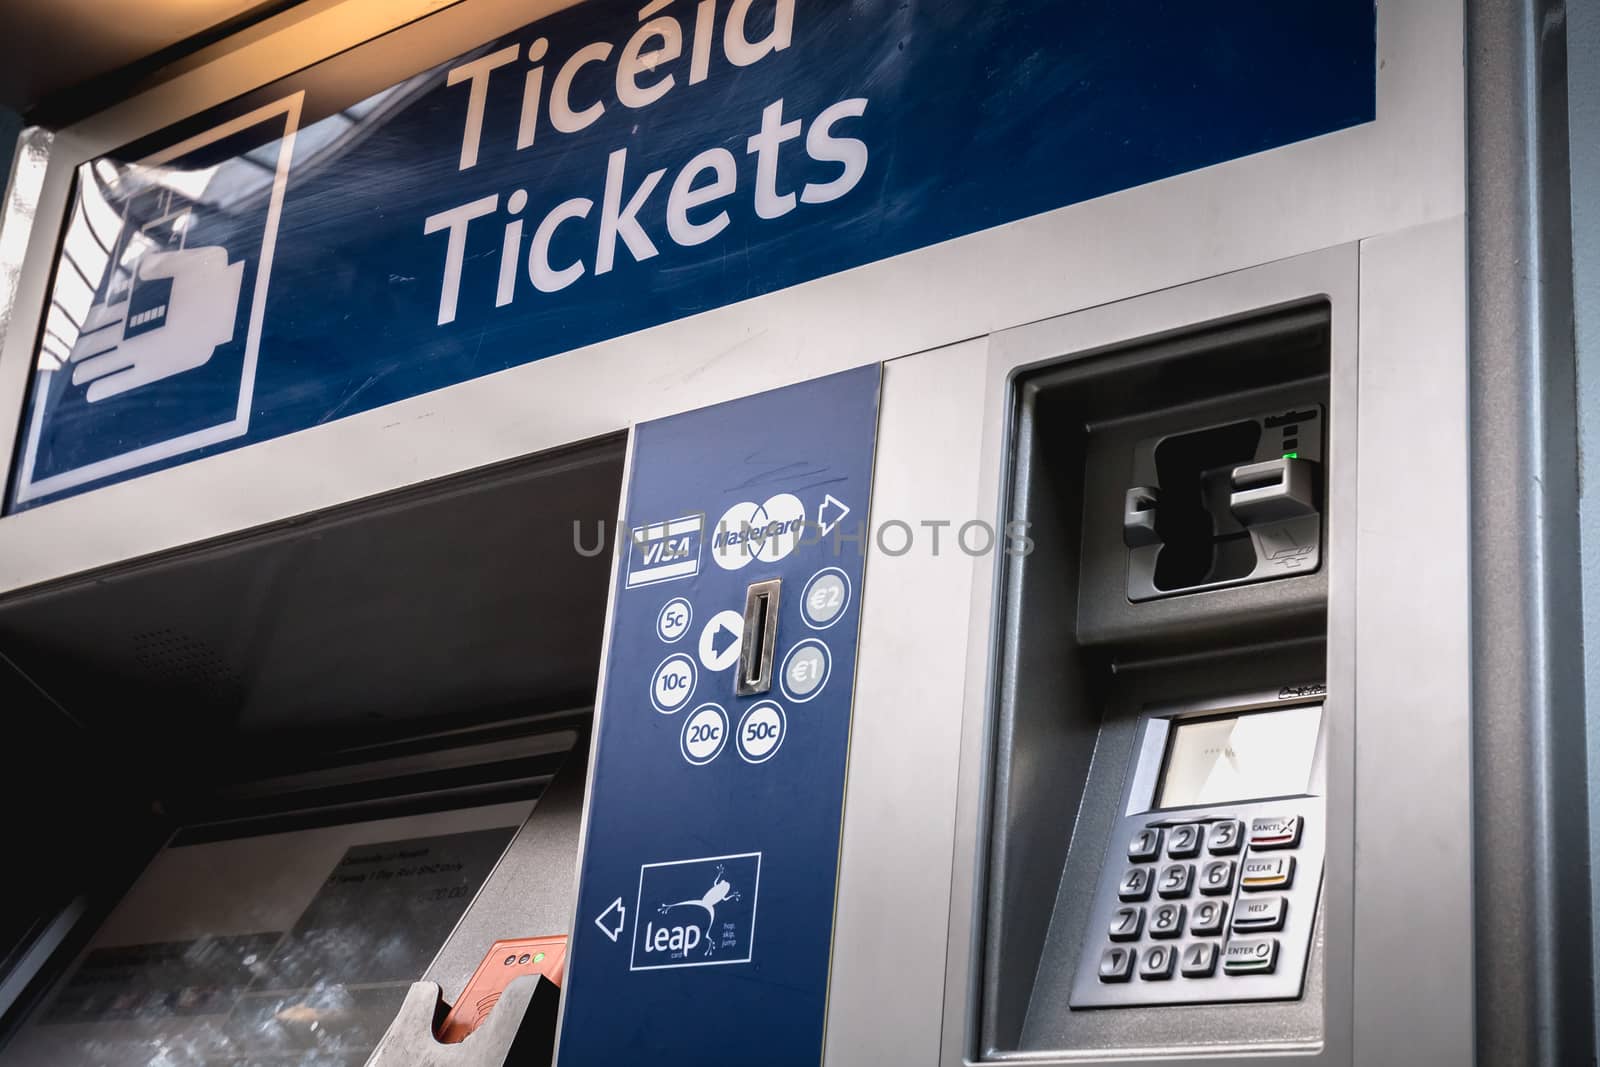 Dublin, Ireland - February 15, 2019: Automatic ticket purchase machine in Connolly DART train station (Staisiun ui Chonghaile) on a winter day